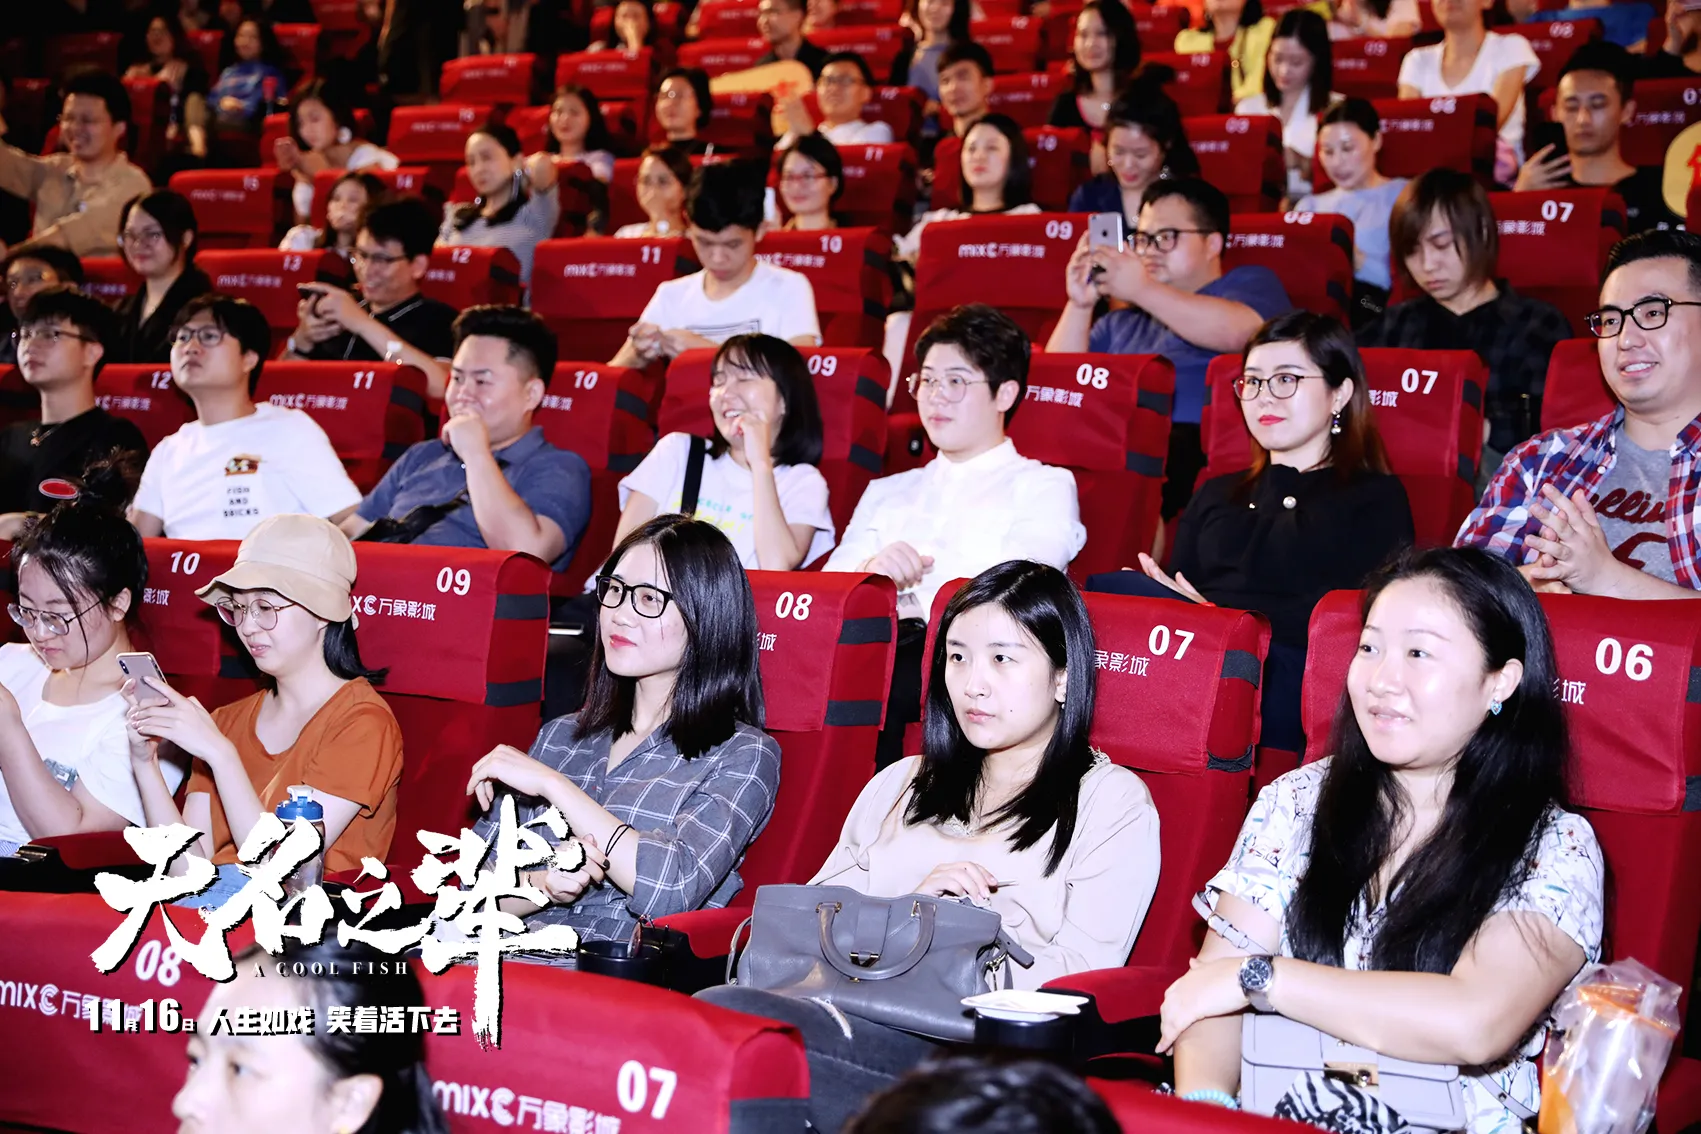 Related story shenzhen studios audience to watch film. JPG